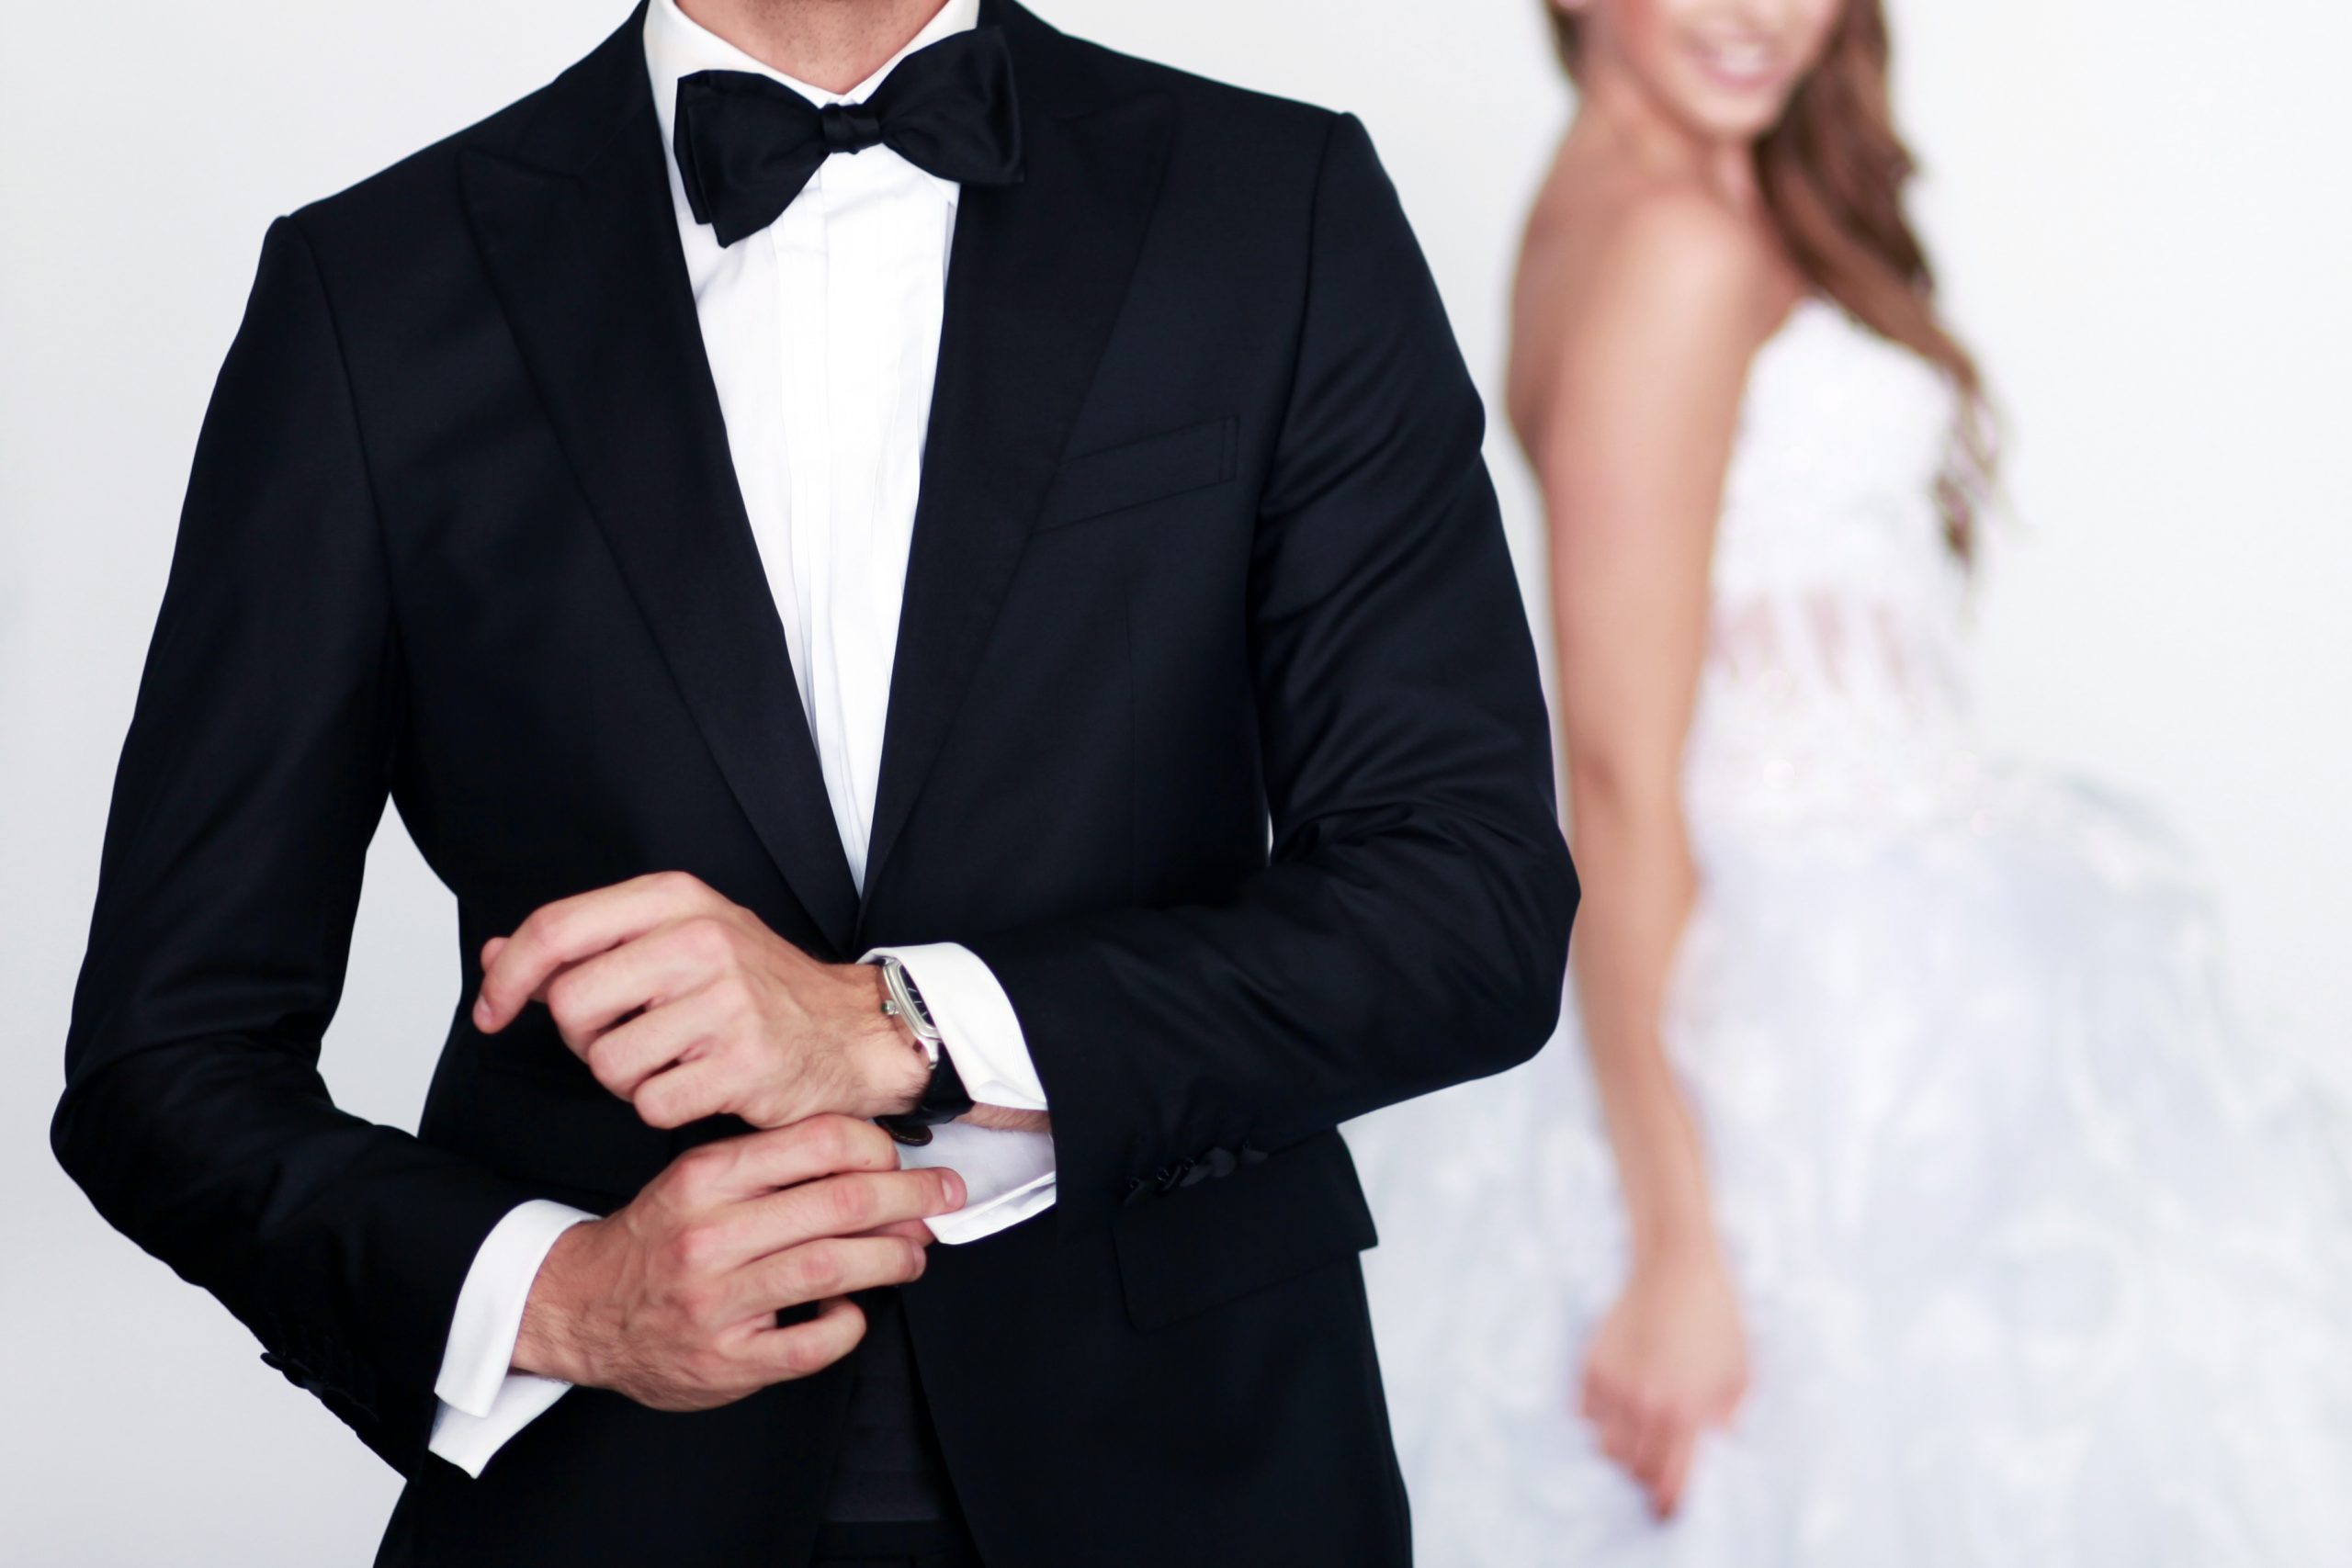 Everything you should know about choosing a wedding suit